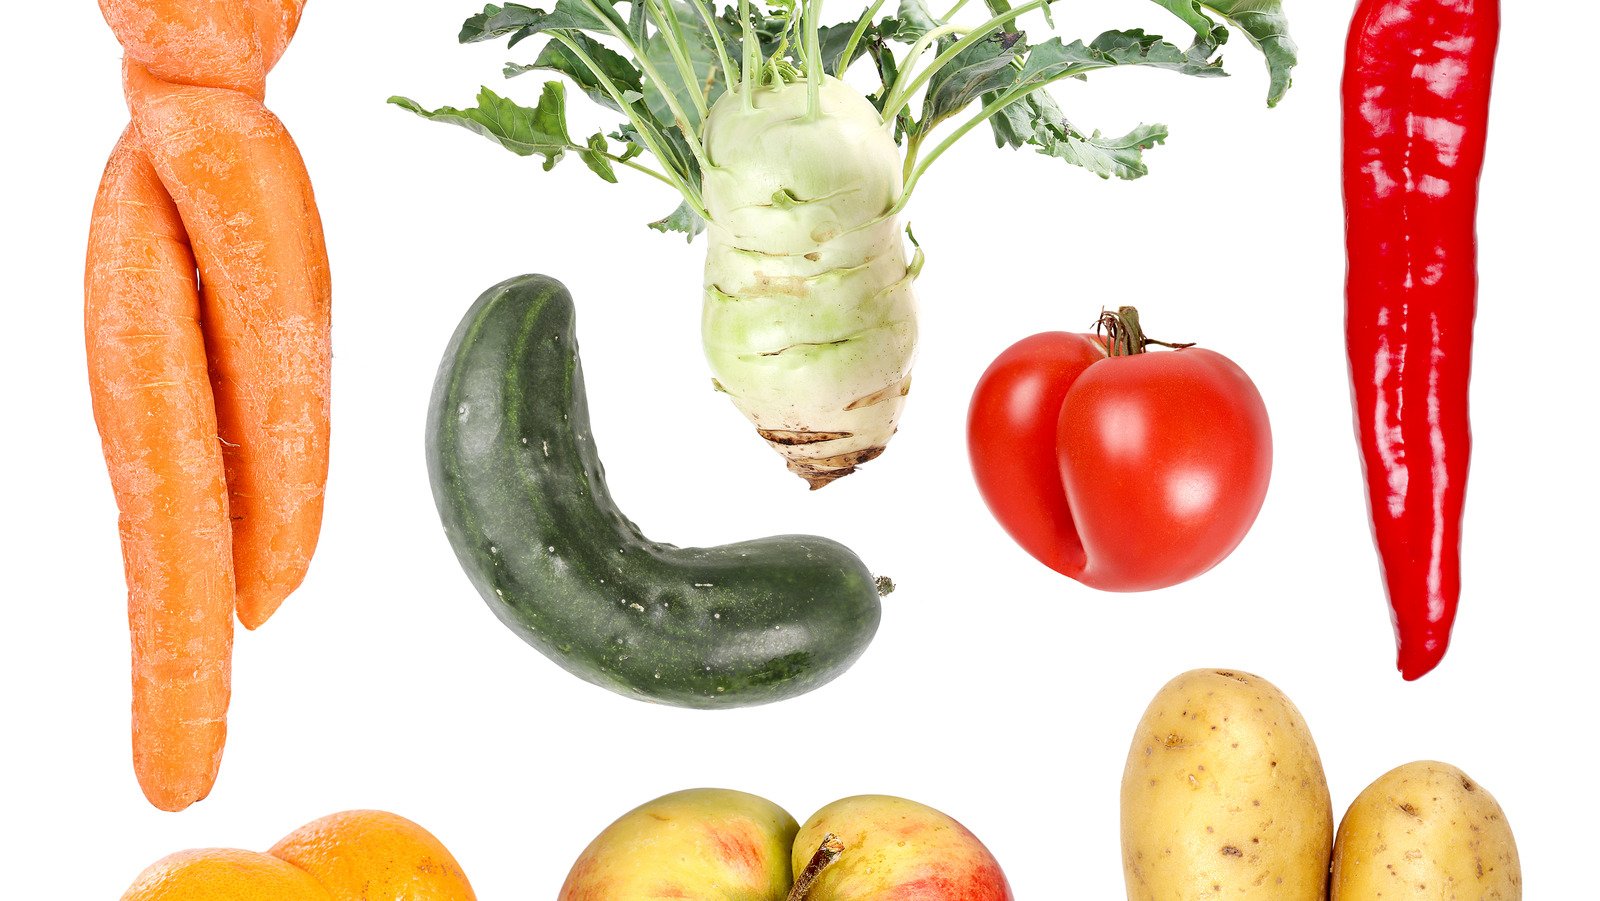 11 Unique Vegetables You've Probably Never Heard Of